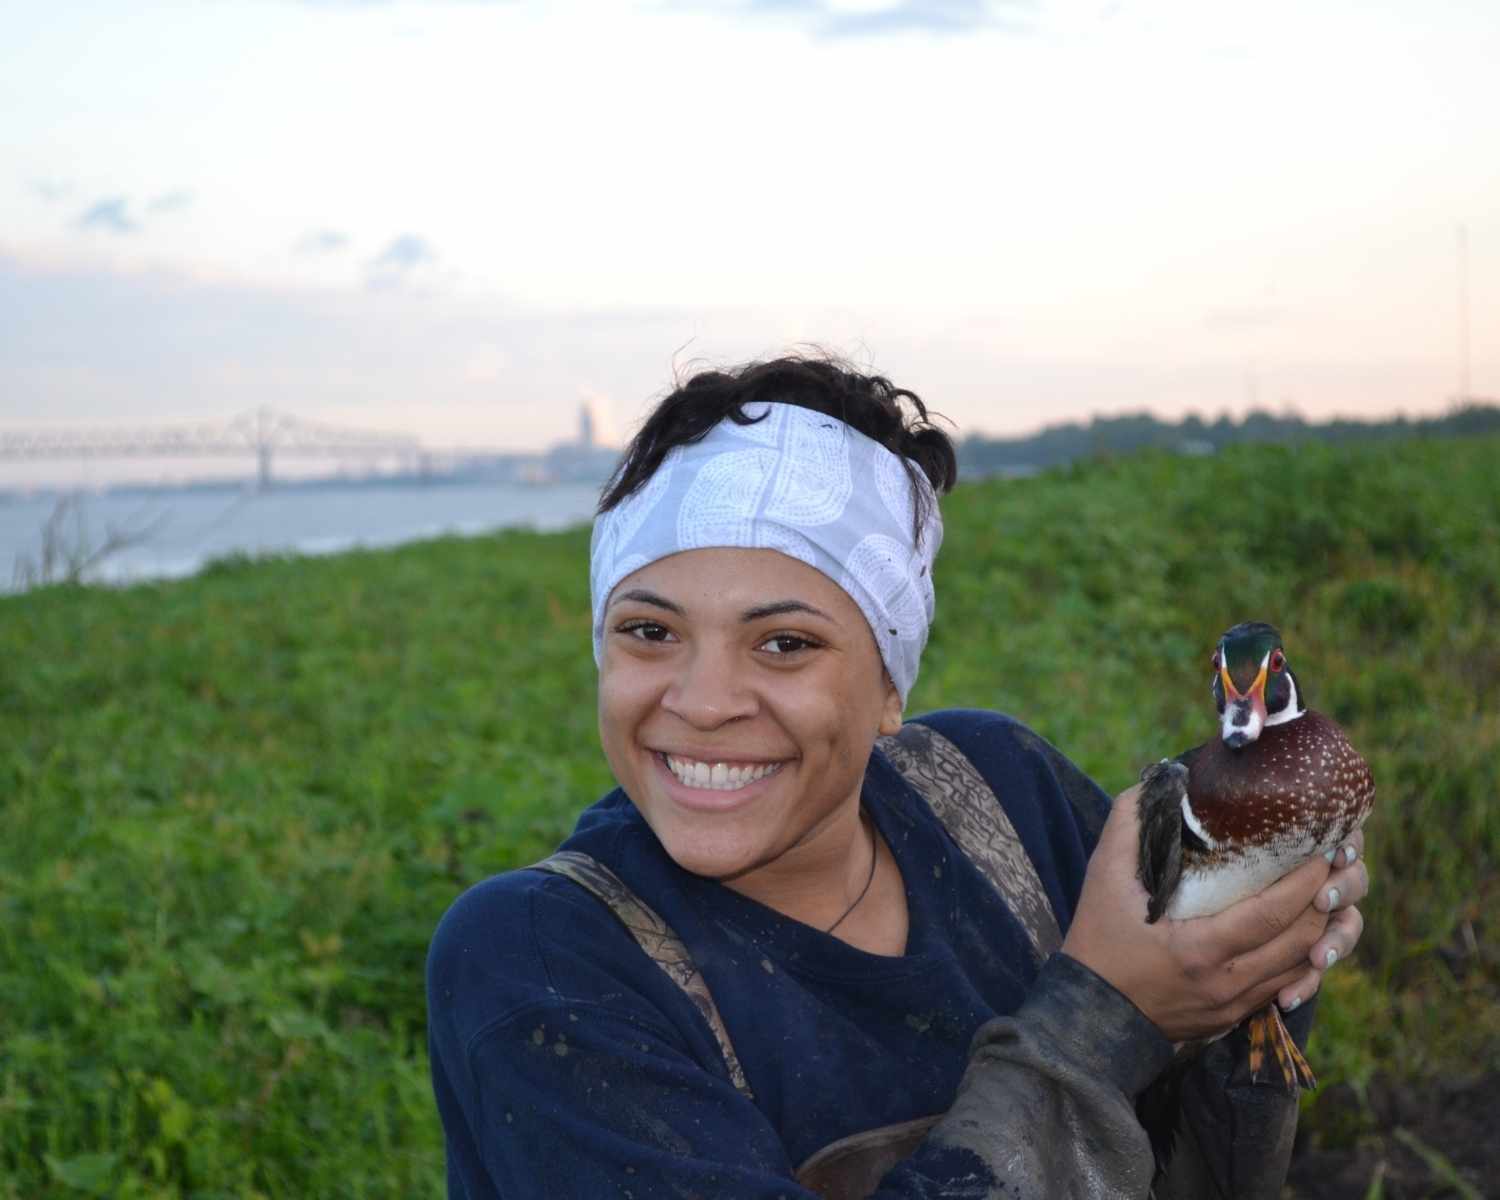 Student holds duck with Baton Rouge bridge in background